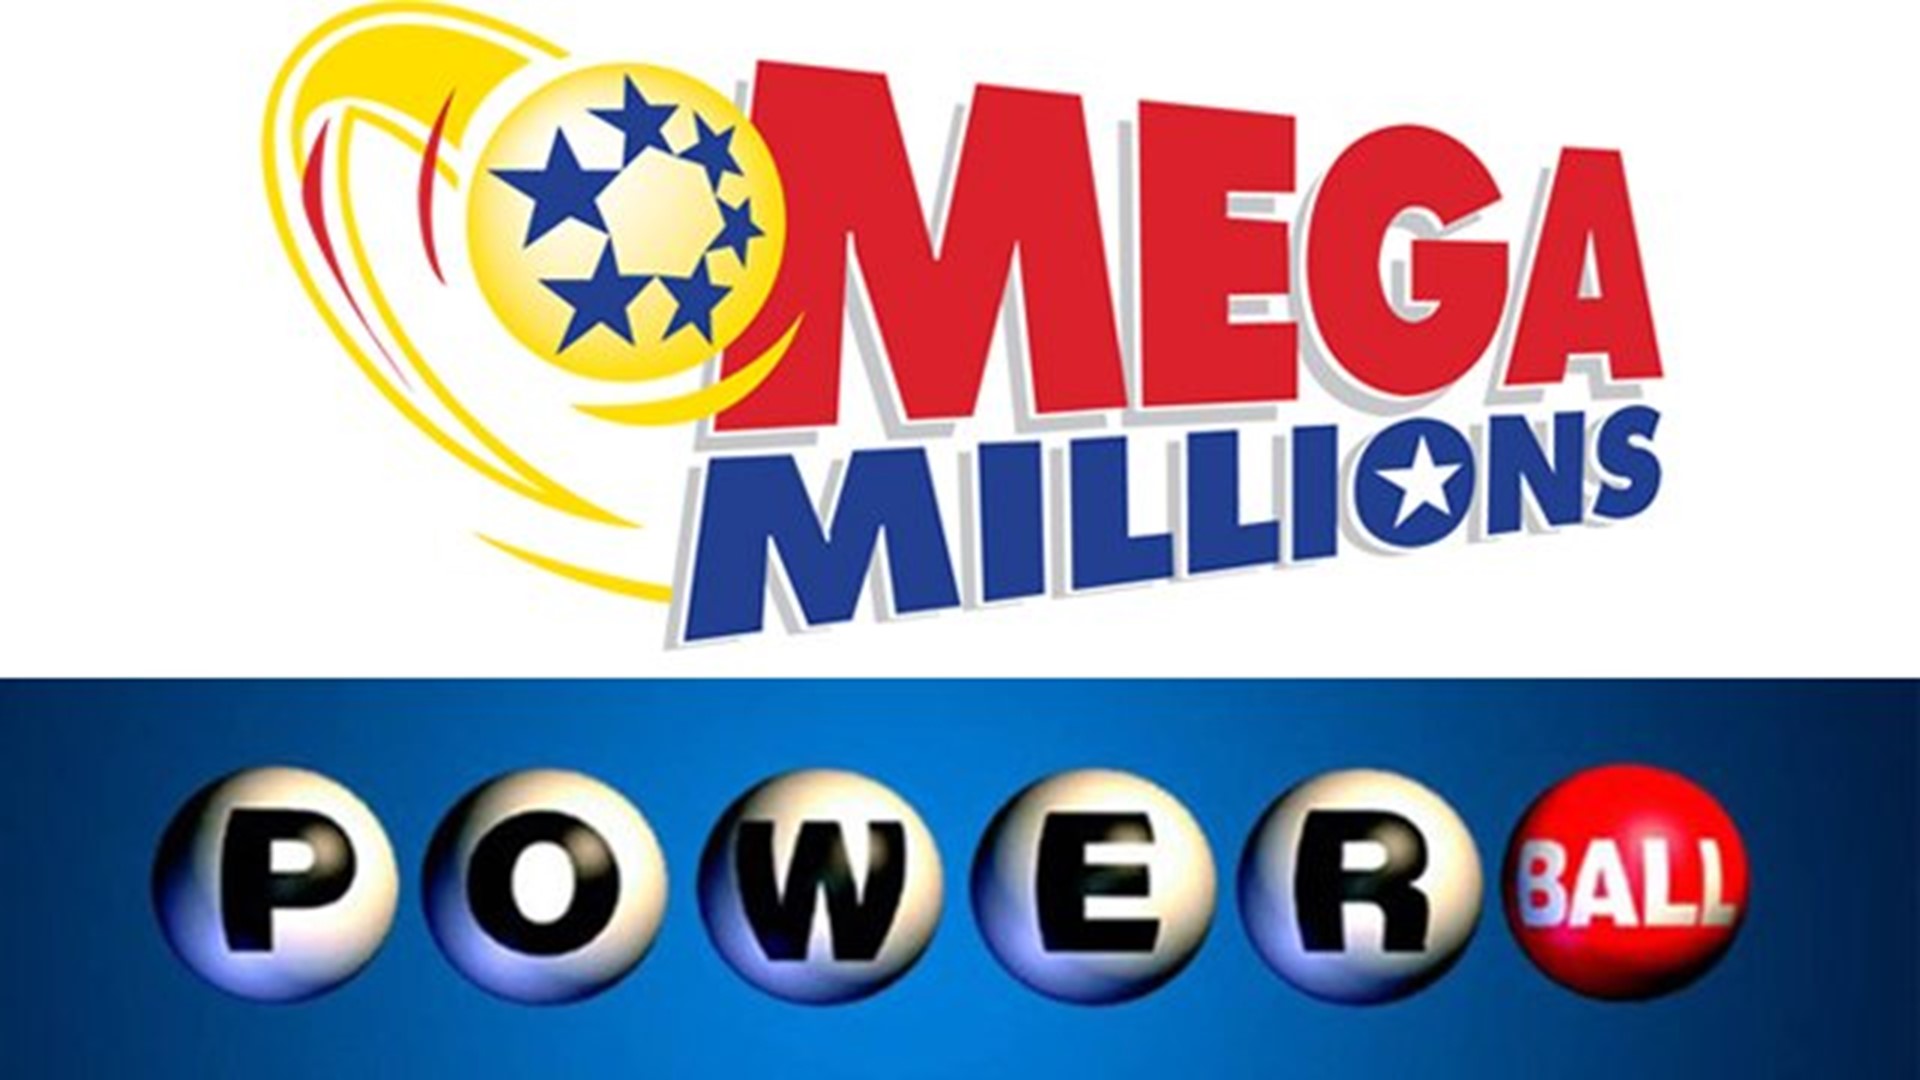 Powerball, Mega Millions Tickets Now Available to Buy Online | wnep.com